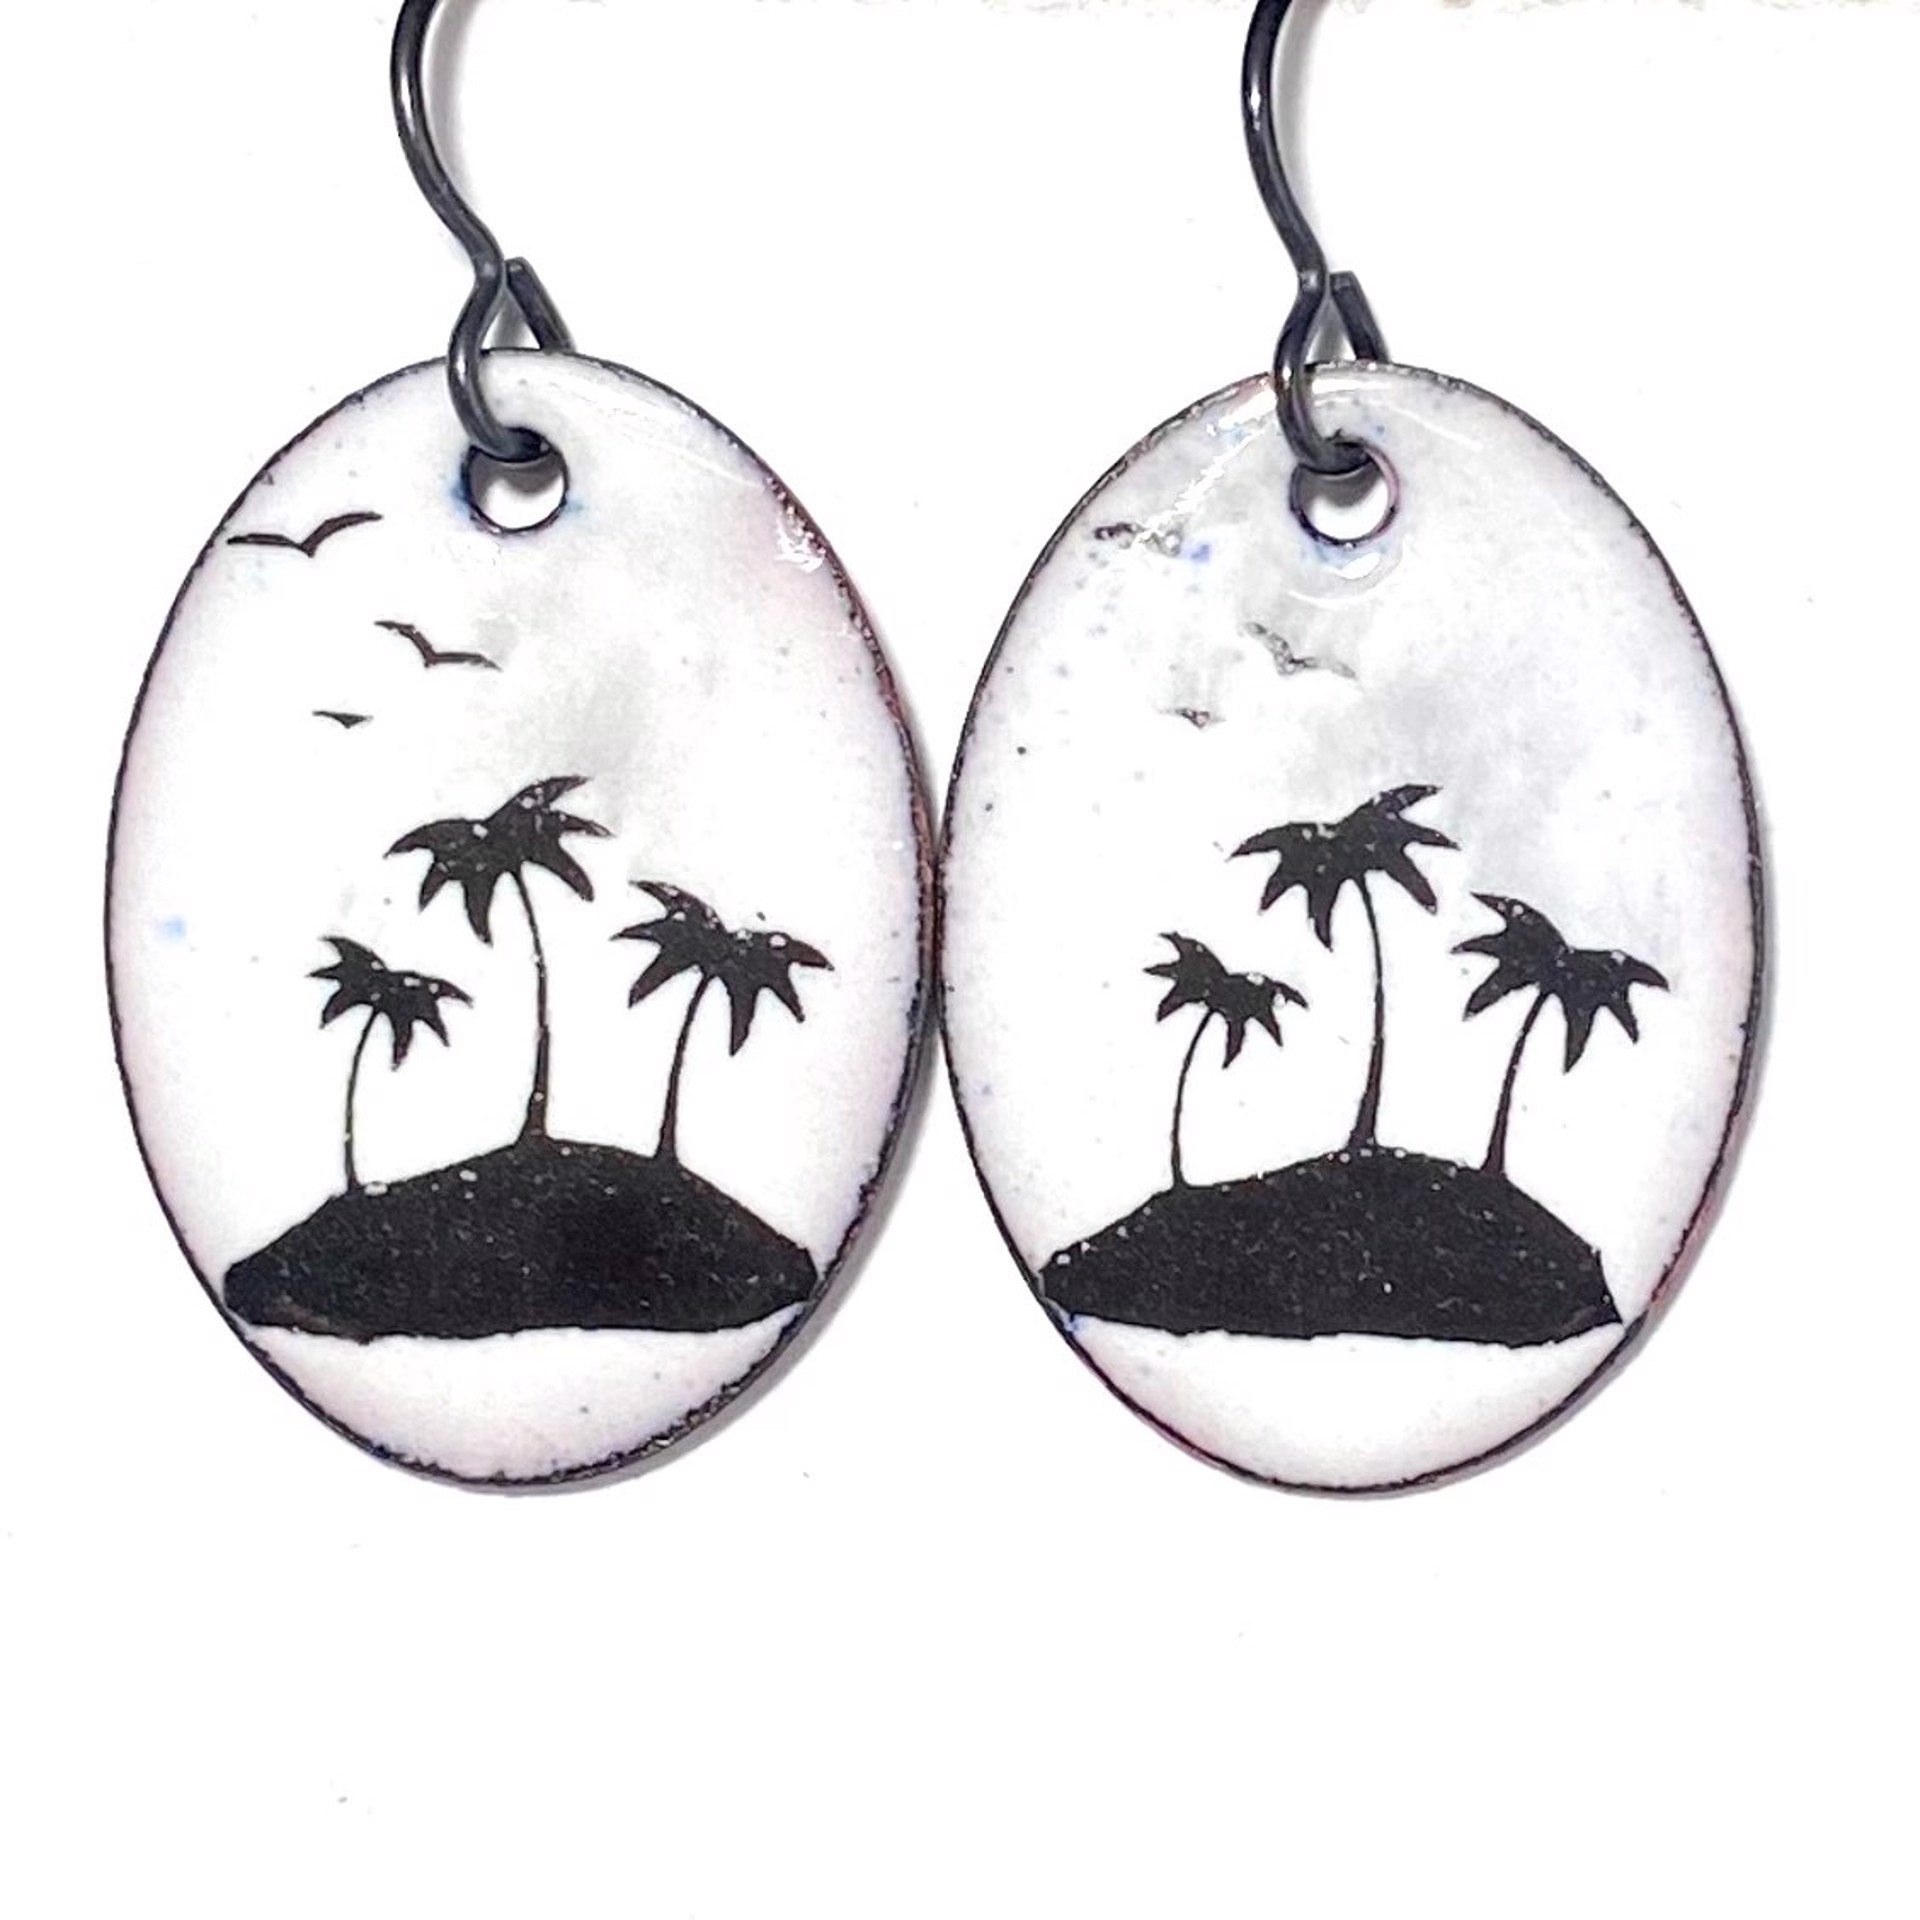 Enamel on Copper Oval Earrings ~with a porcelain Palm Tree mineral "decal" fired on top~ by Karen Hakim